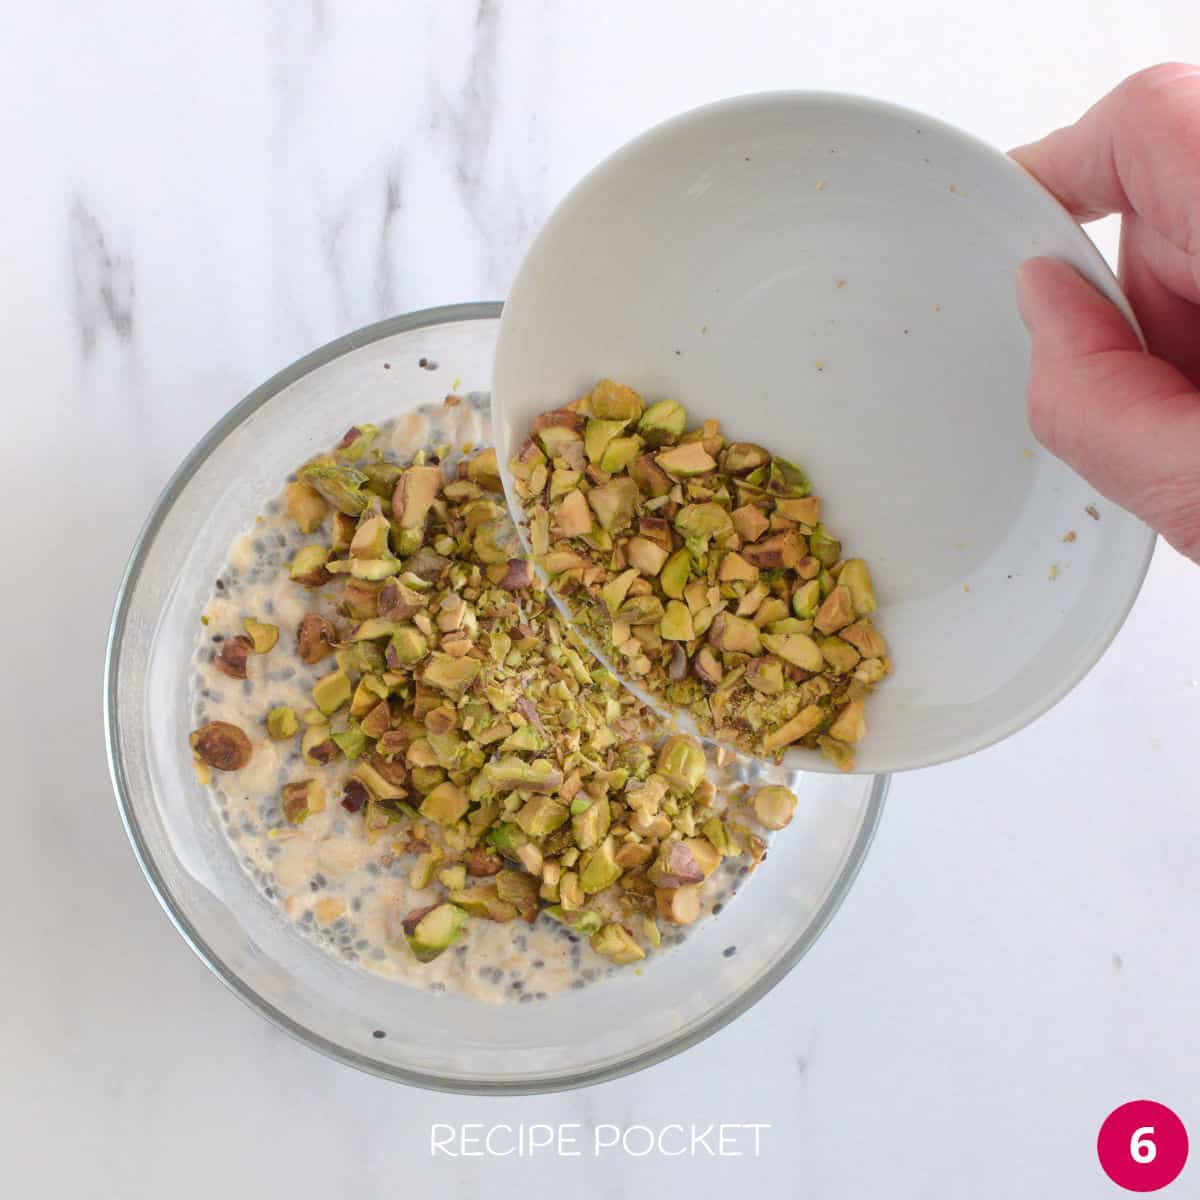 Nuts being added to overnight oats in a bowl.